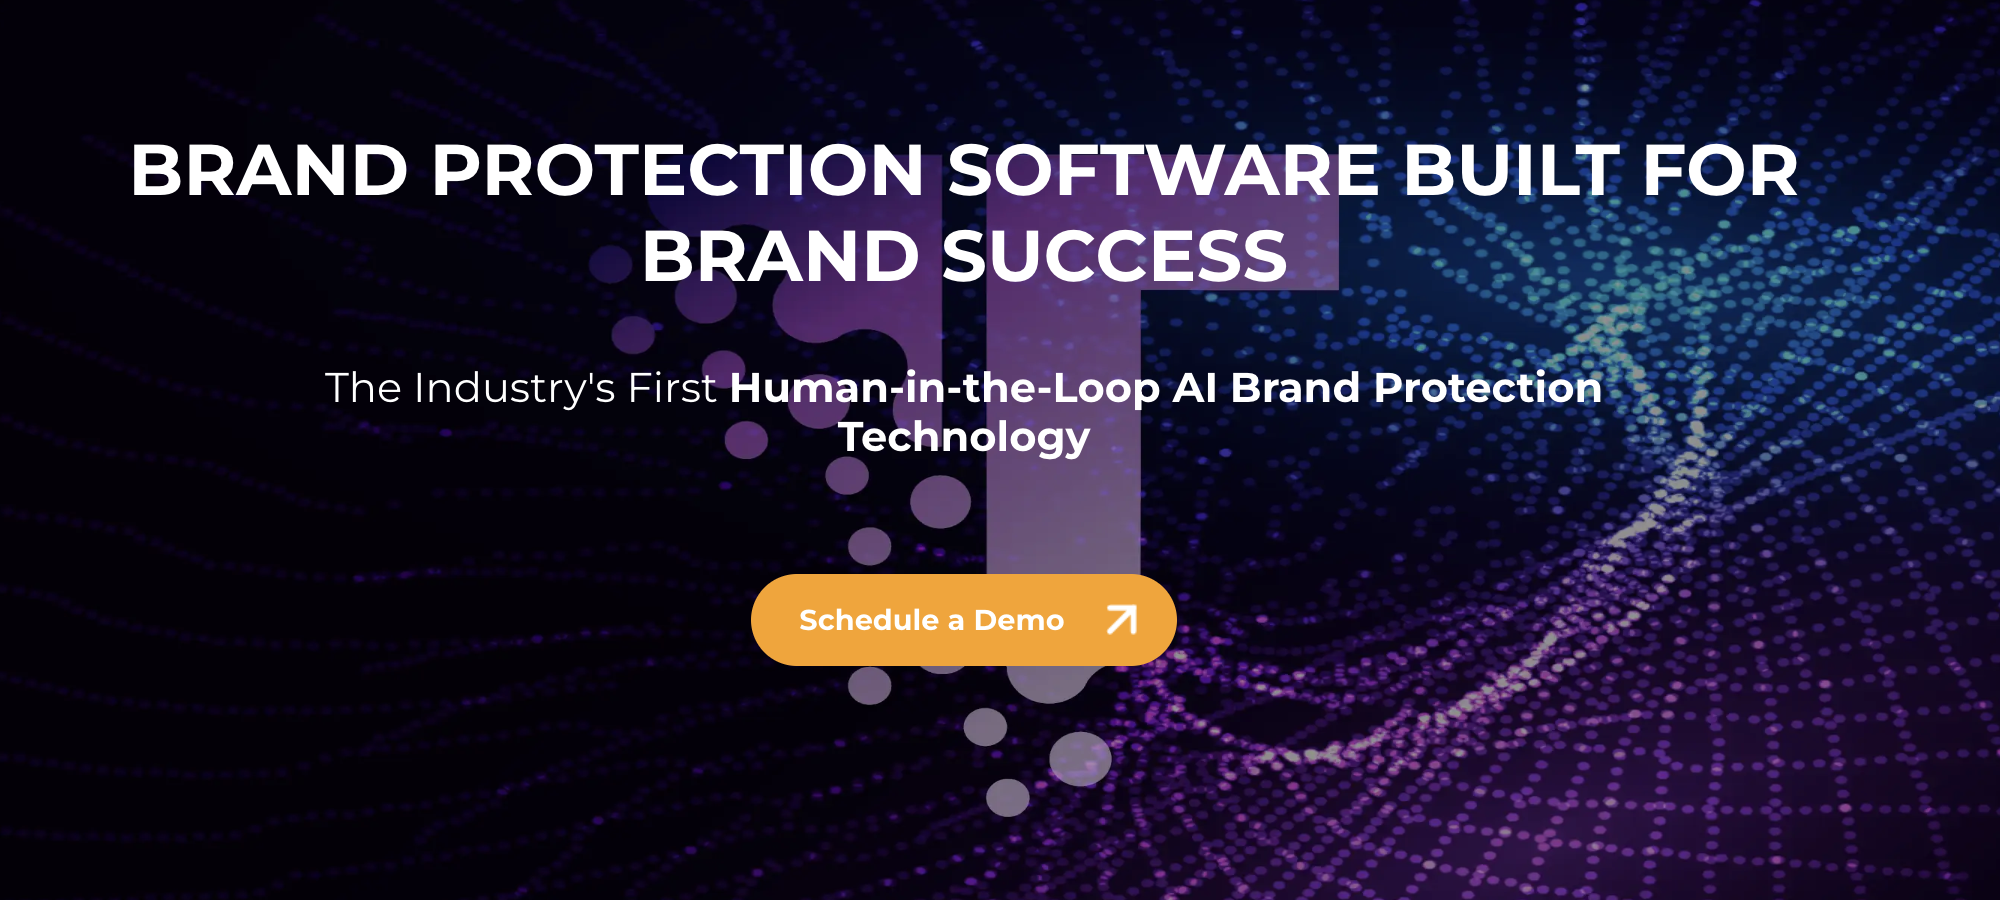 Tracer-brand-protection-software